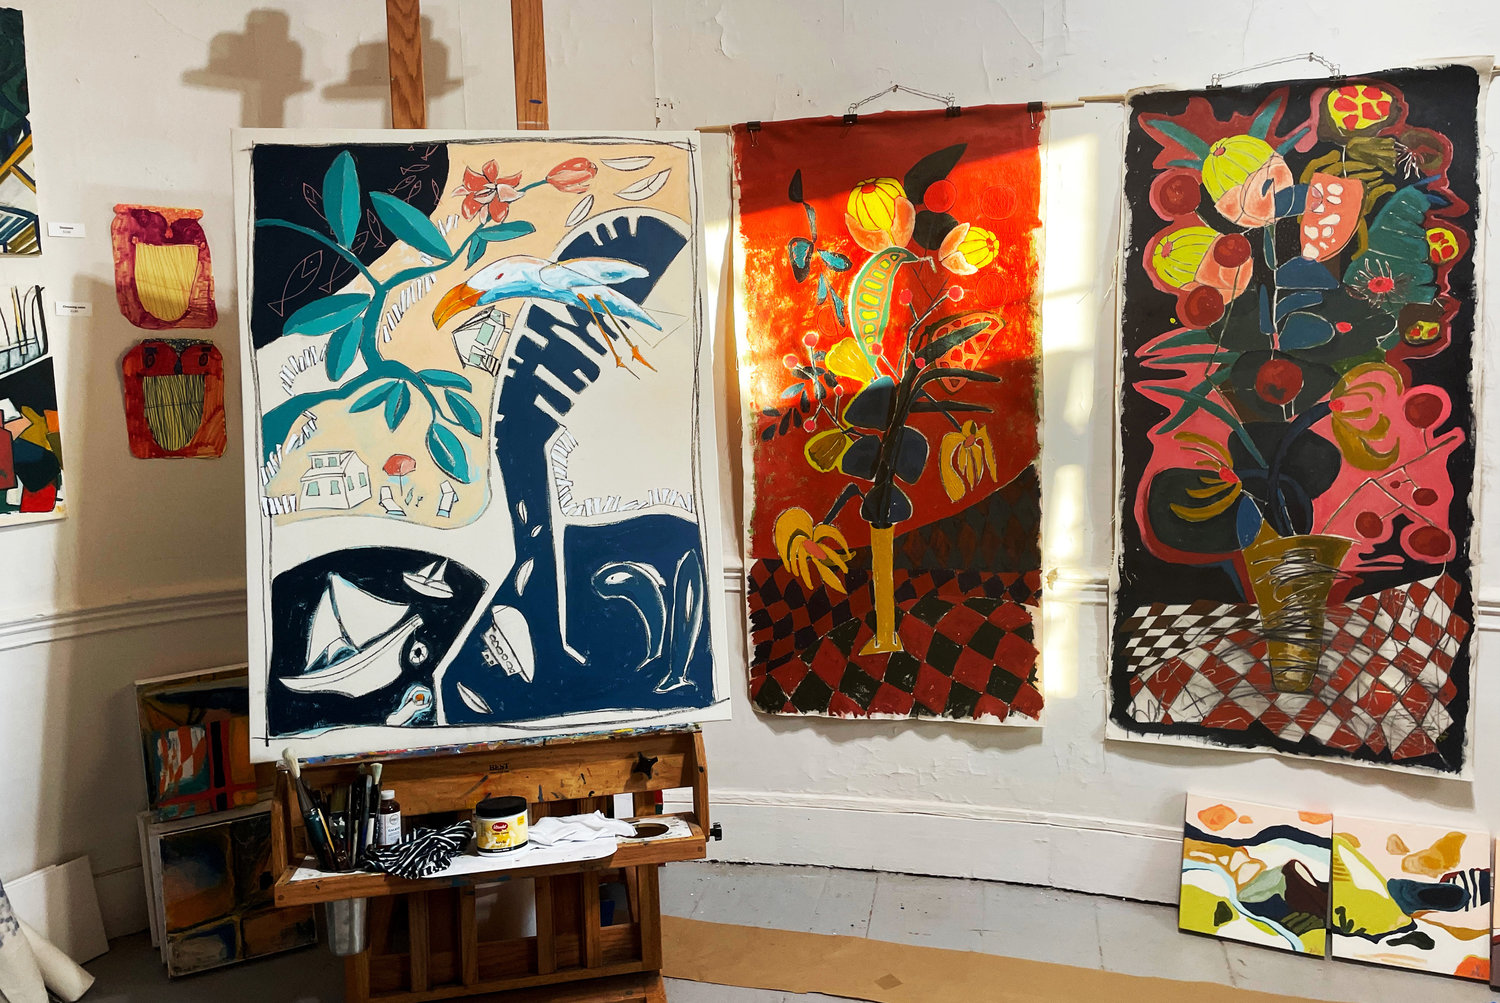 Inside the studio of artist Anahid Ypres